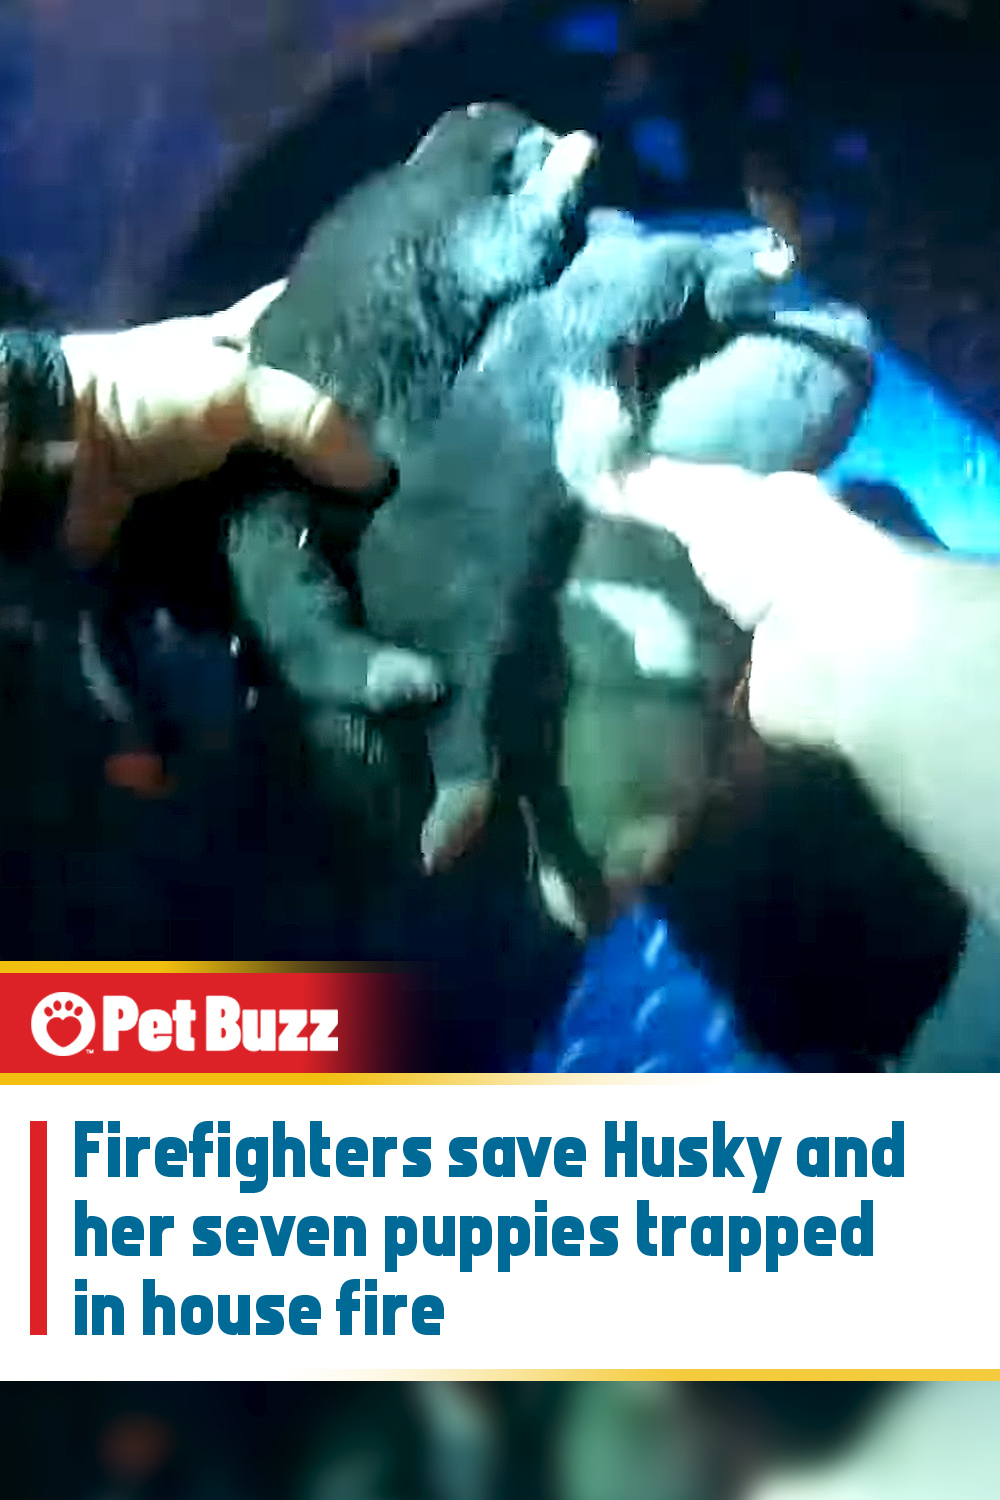 Firefighters save Husky and her seven puppies trapped in house fire